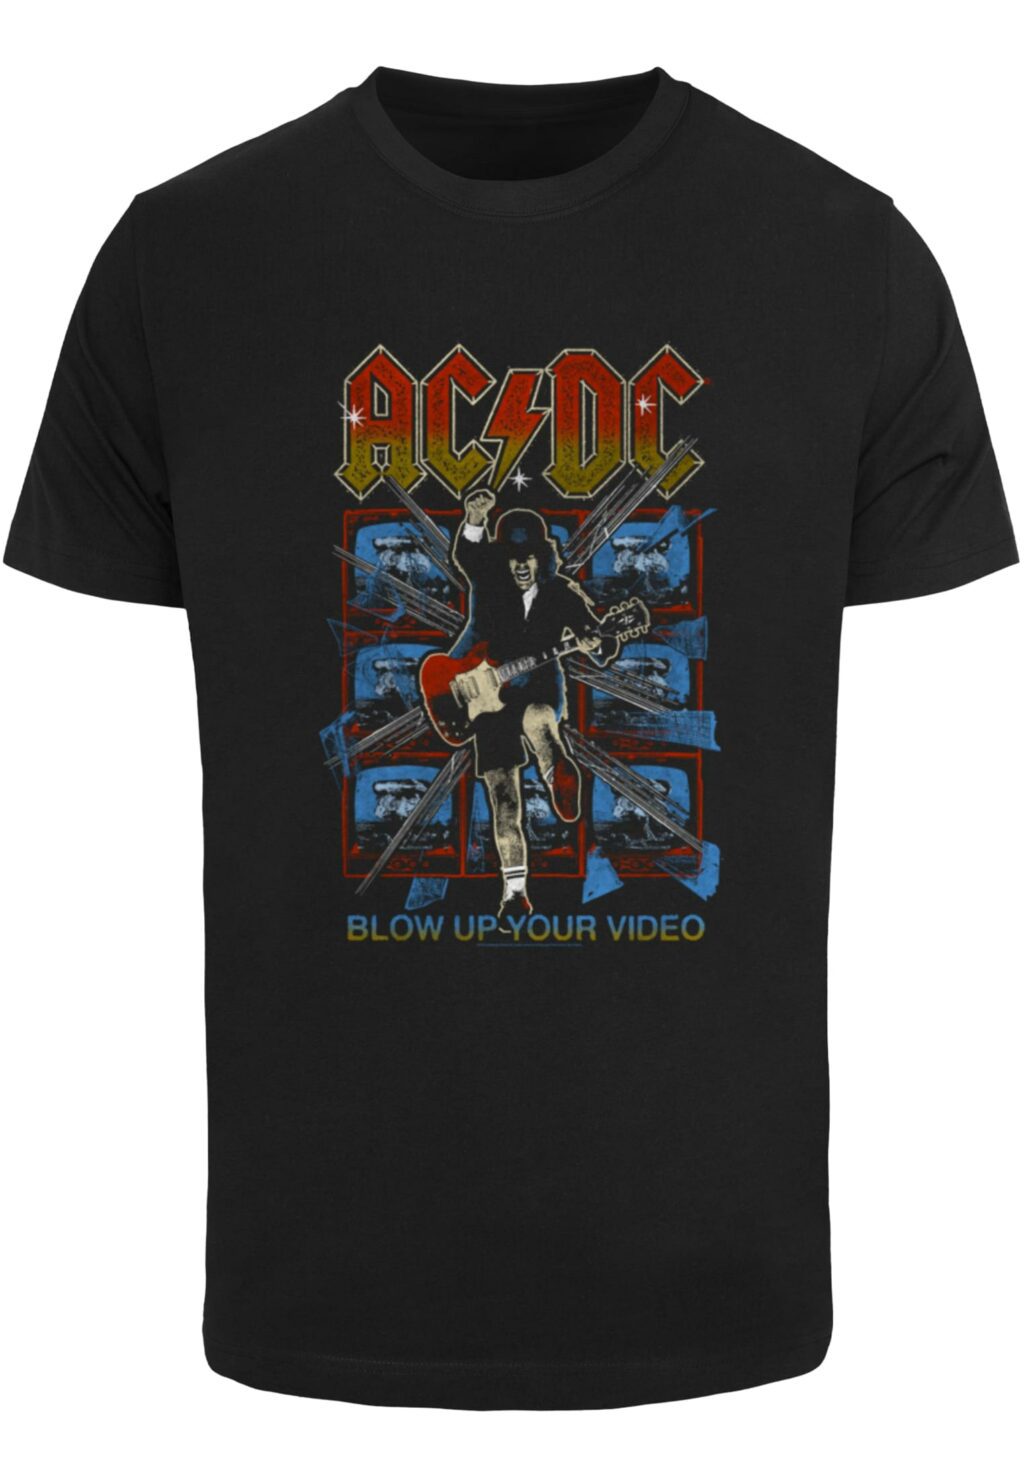 ACDC Blow Up Your Video Tee black MC990